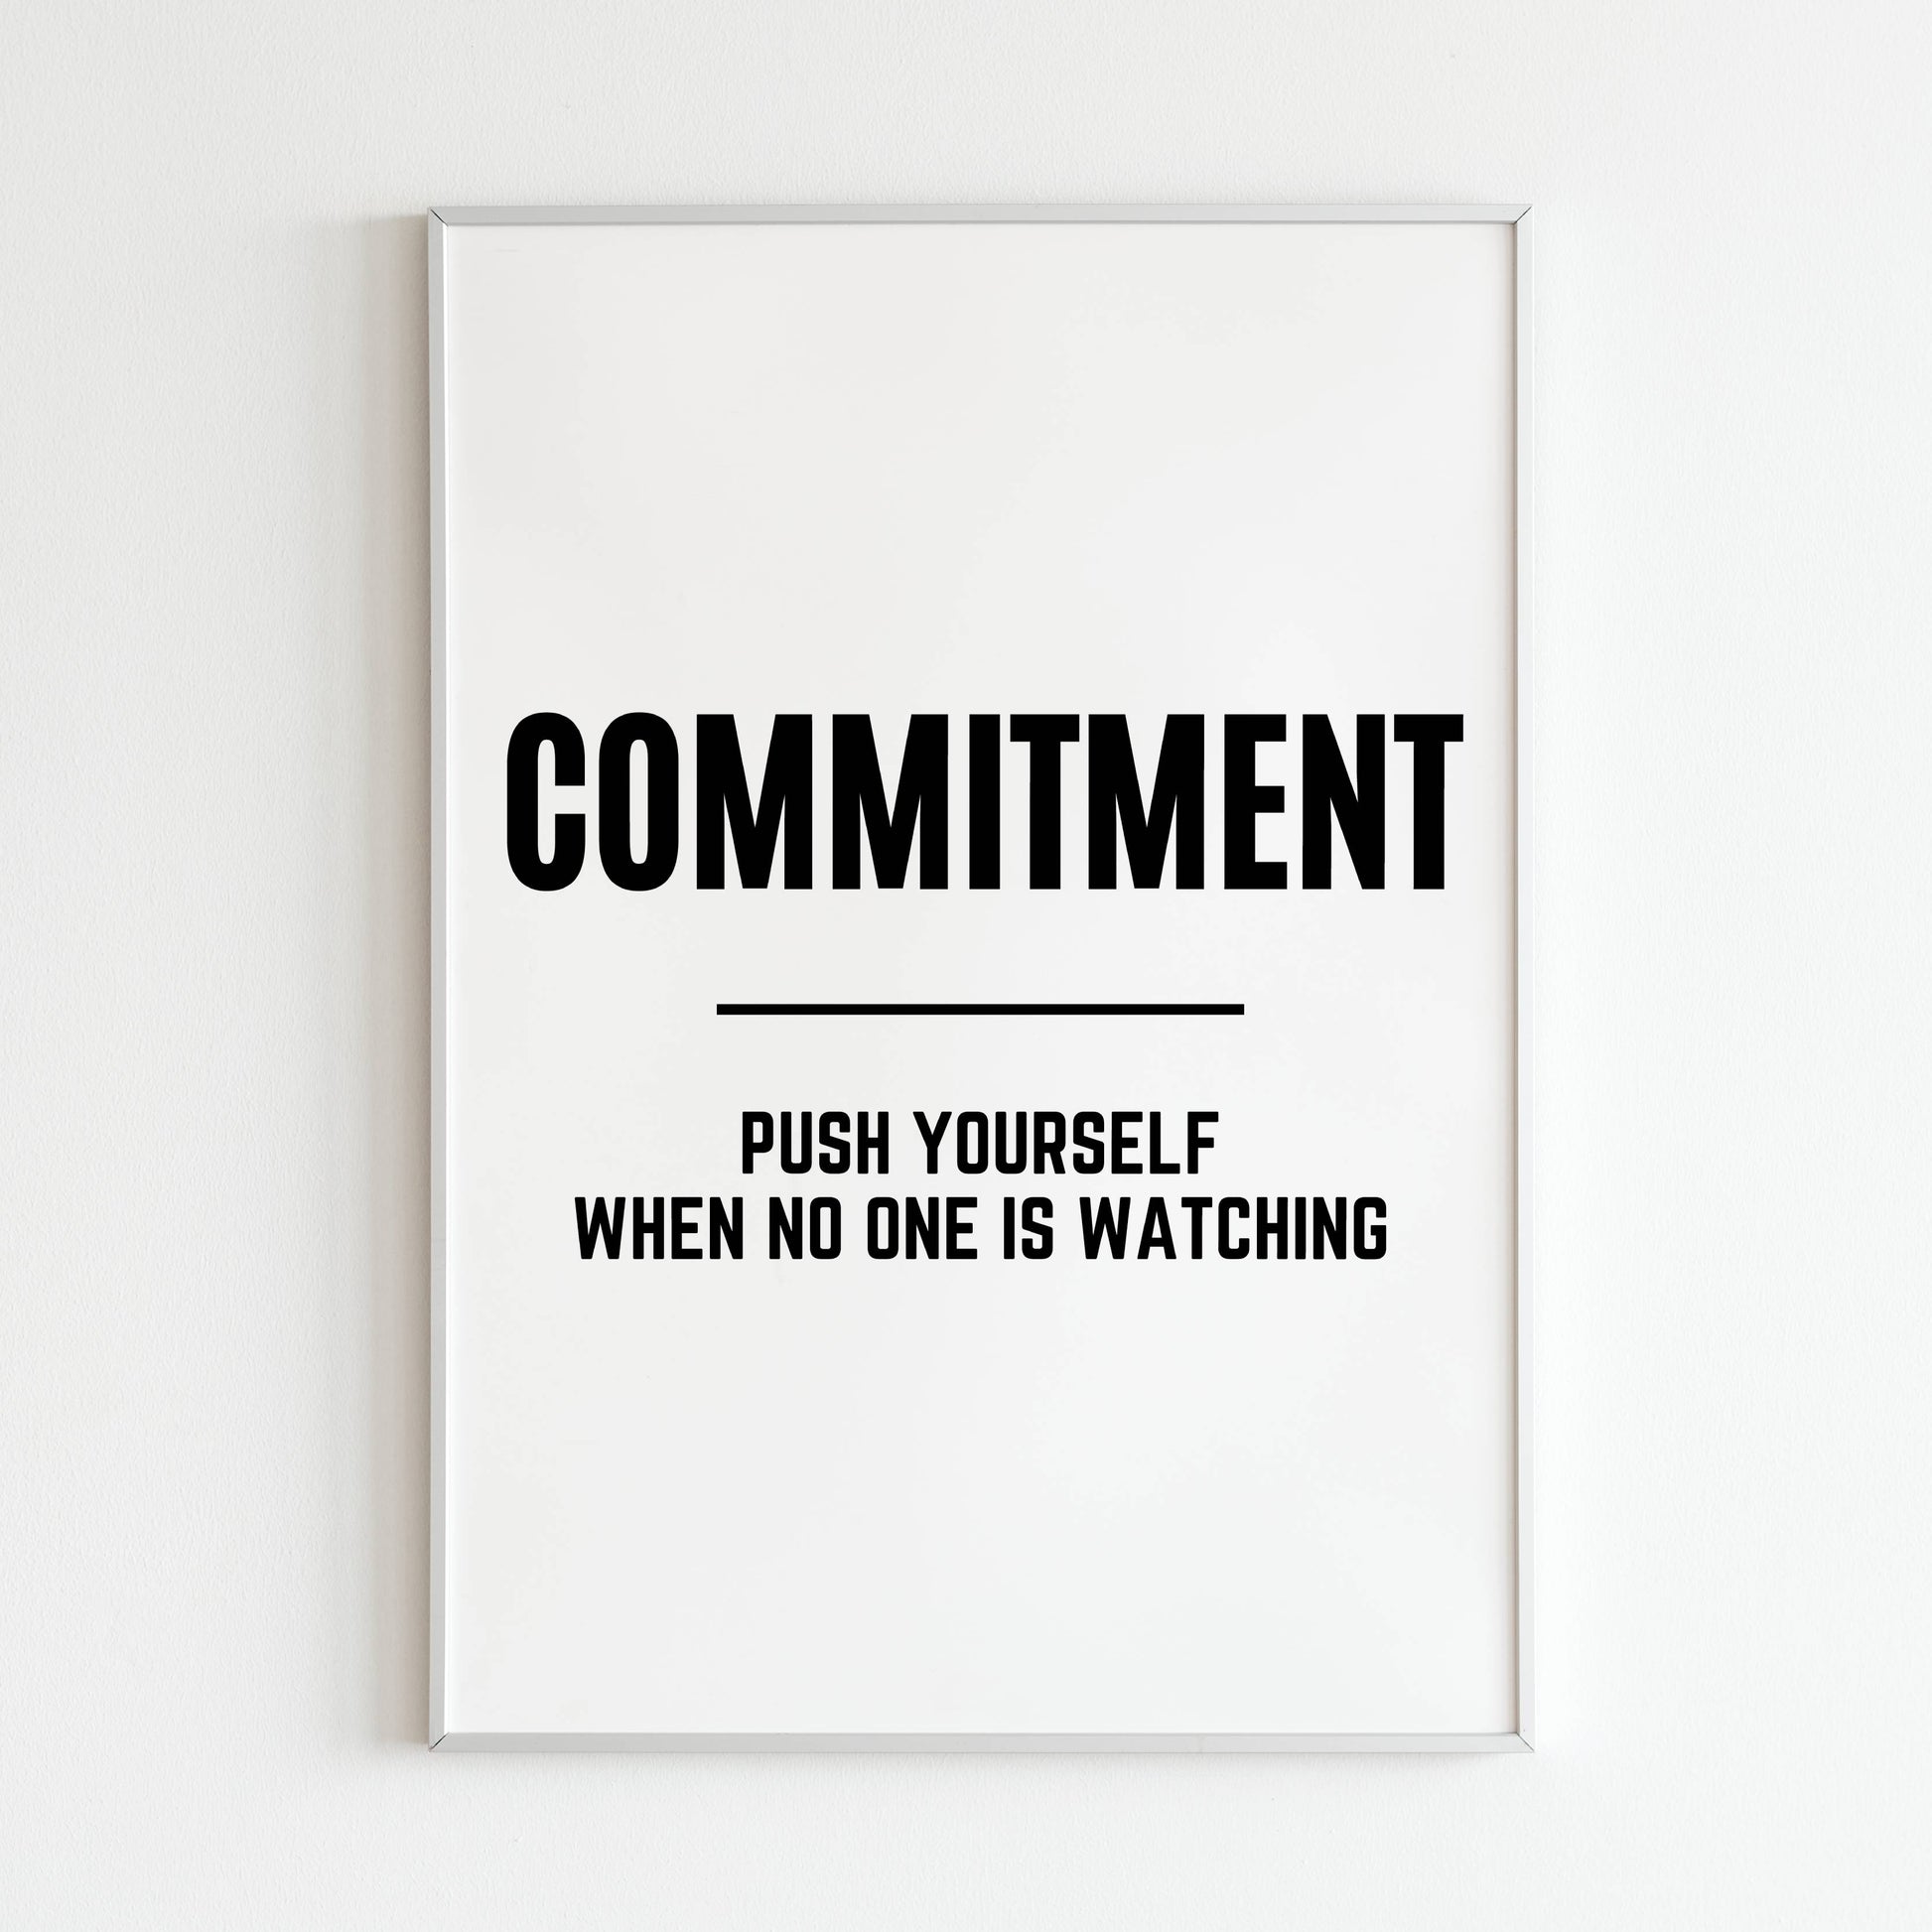 Downloadable "Commitment meaning" art print to define commitment.